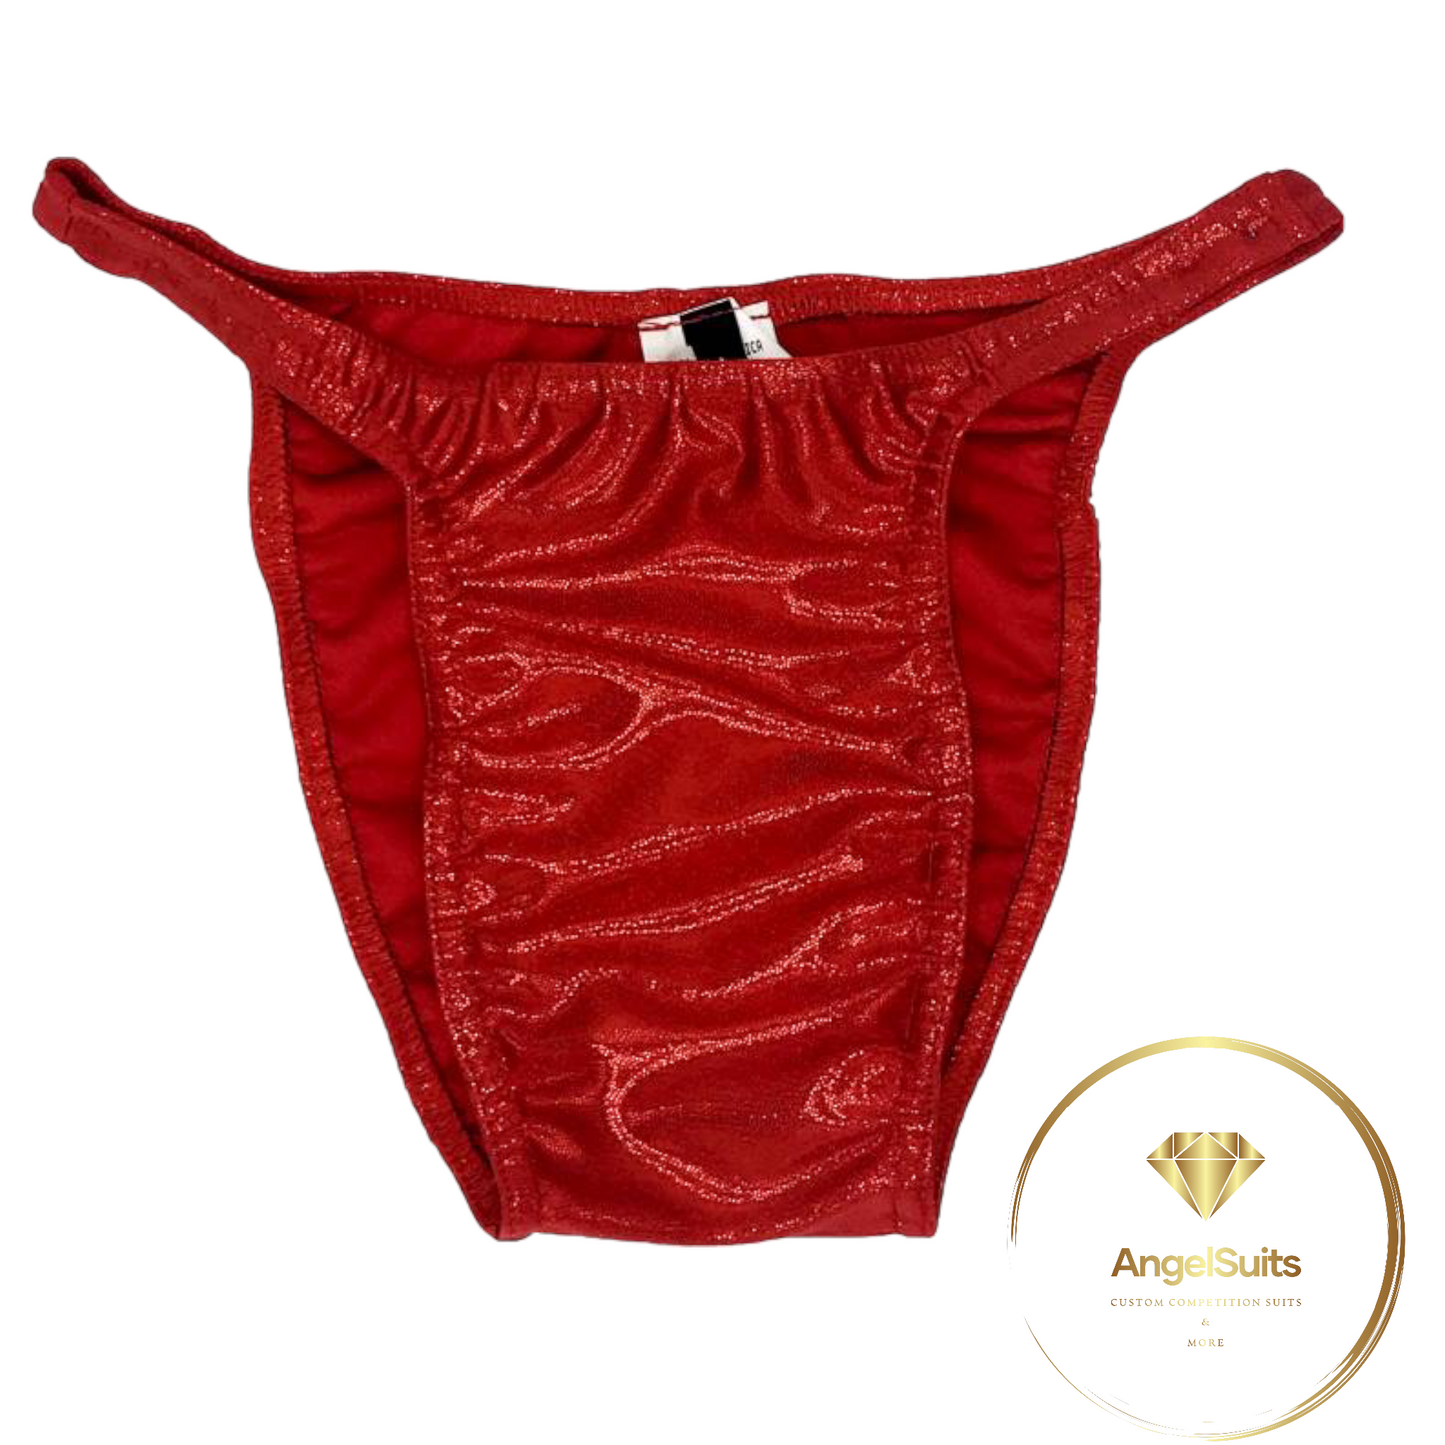 MEN'S BRIEFS PRO WITH GLOSSY RED PLICA